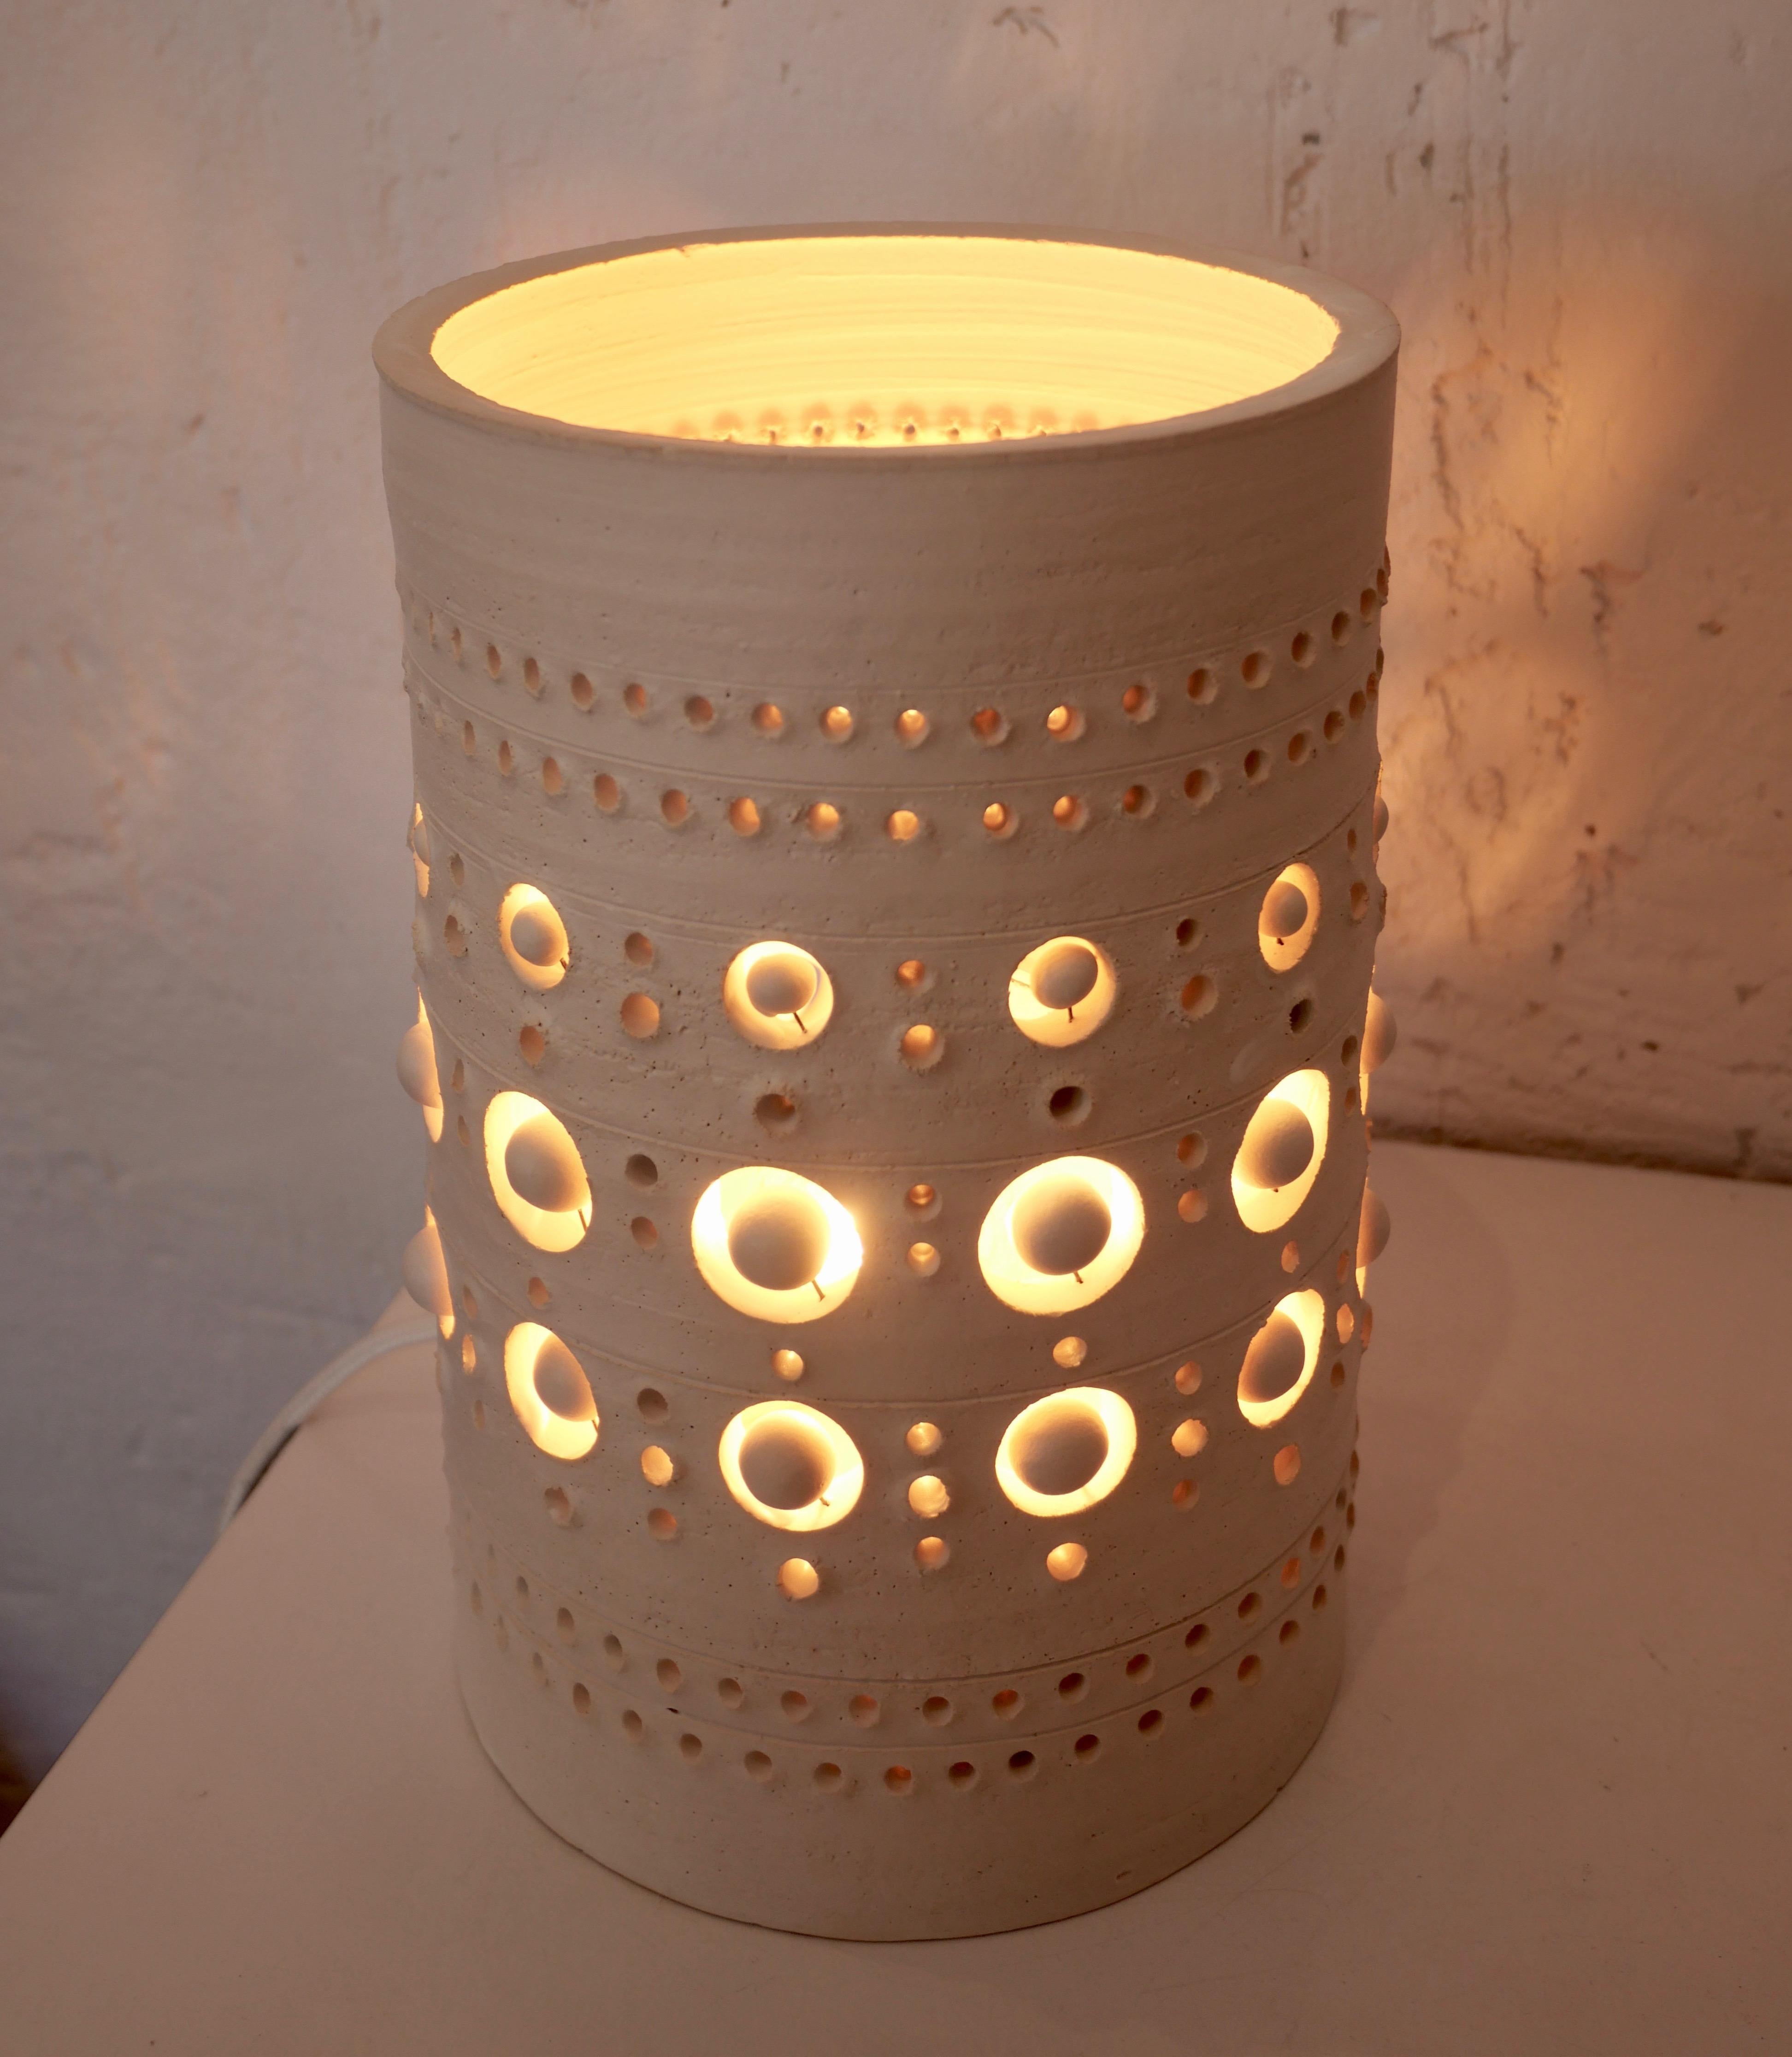 Georges Pelletier TOTEM Table Lamp, White Enamelled Ceramic, France, 2020 In New Condition For Sale In Santa Gertrudis, Baleares